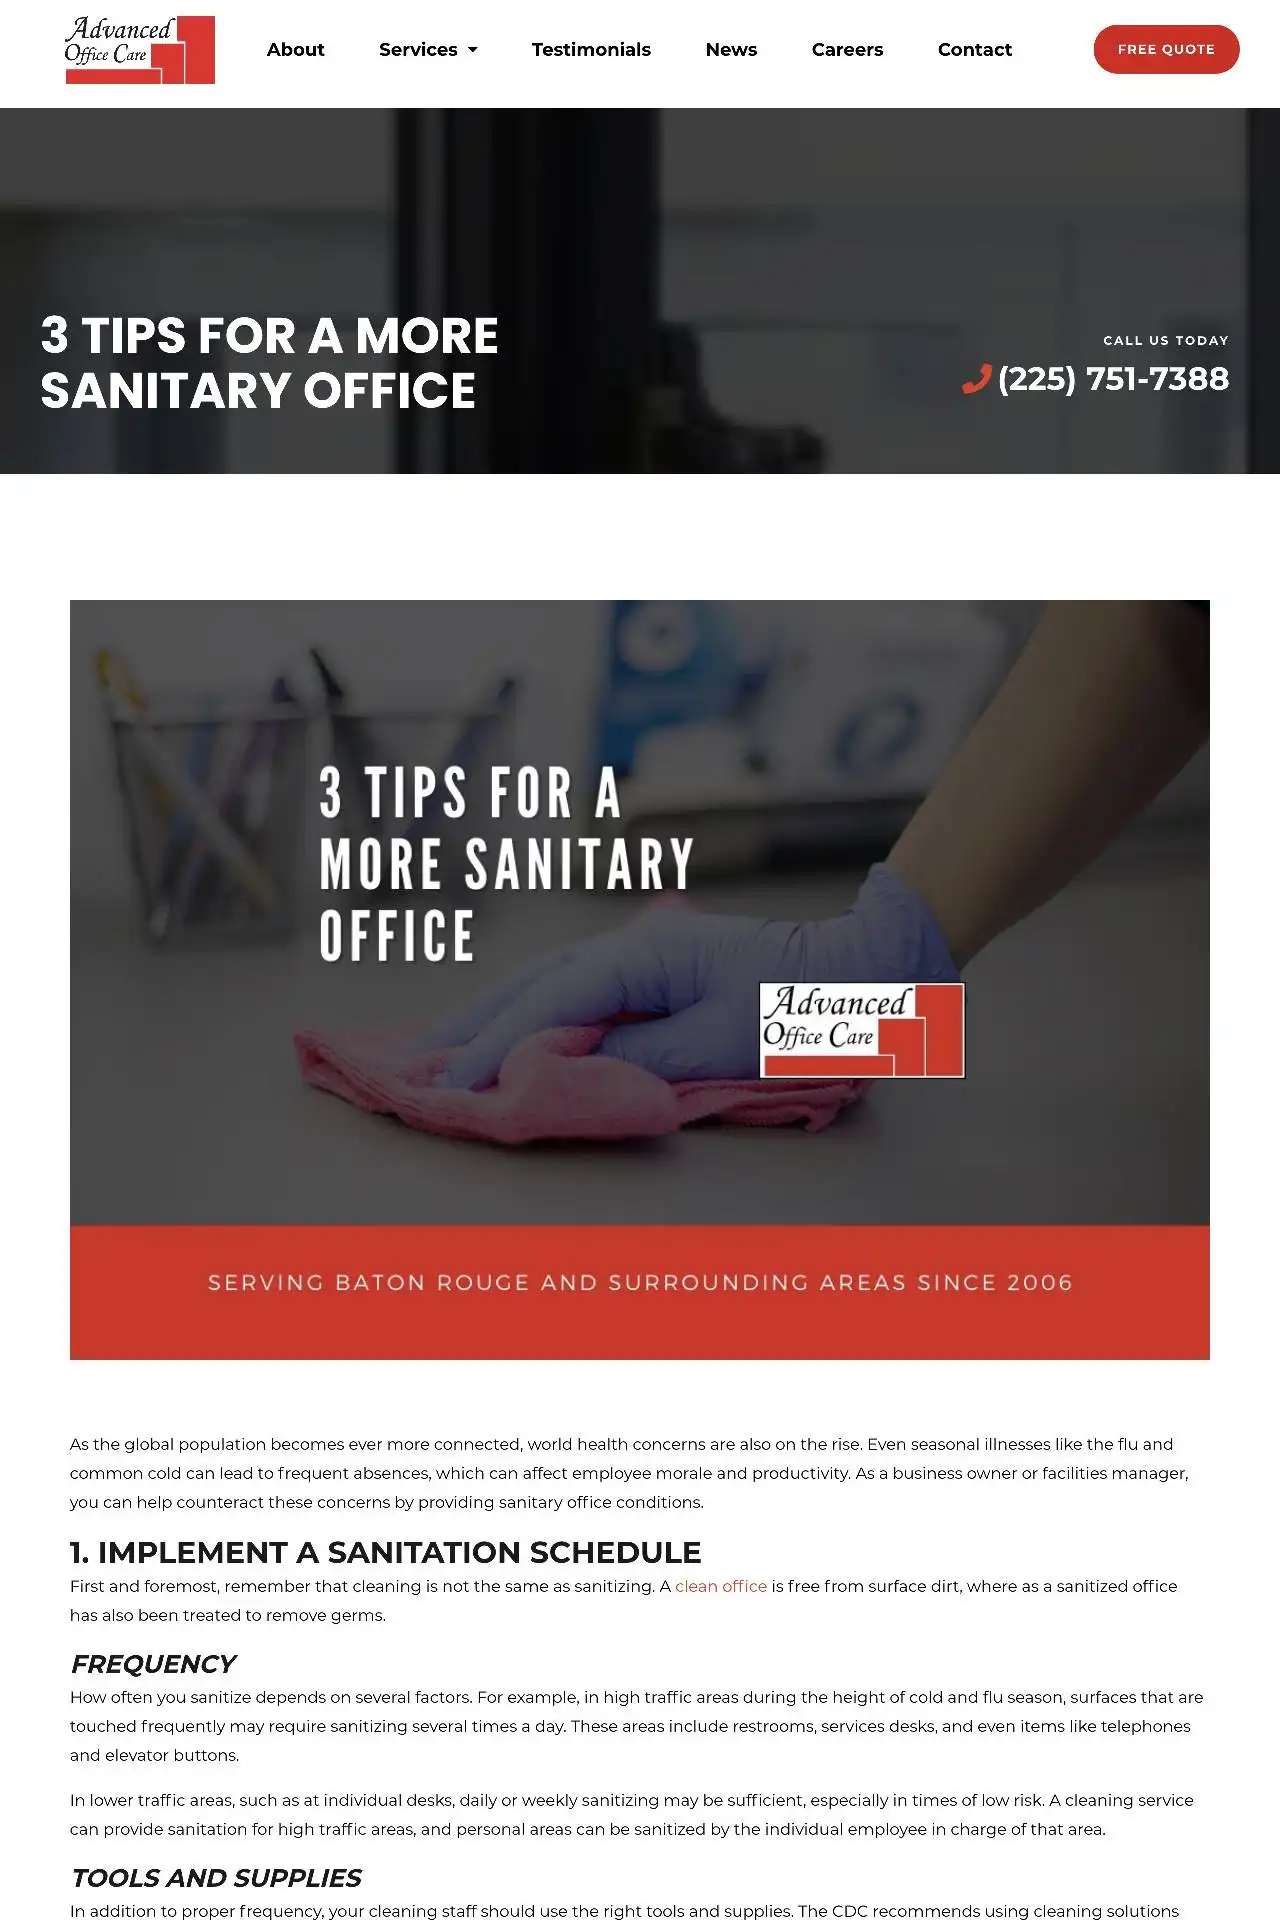 baton rouge cleaning company website design development https aocla.com cleaning 3 tips for a more sanitary office